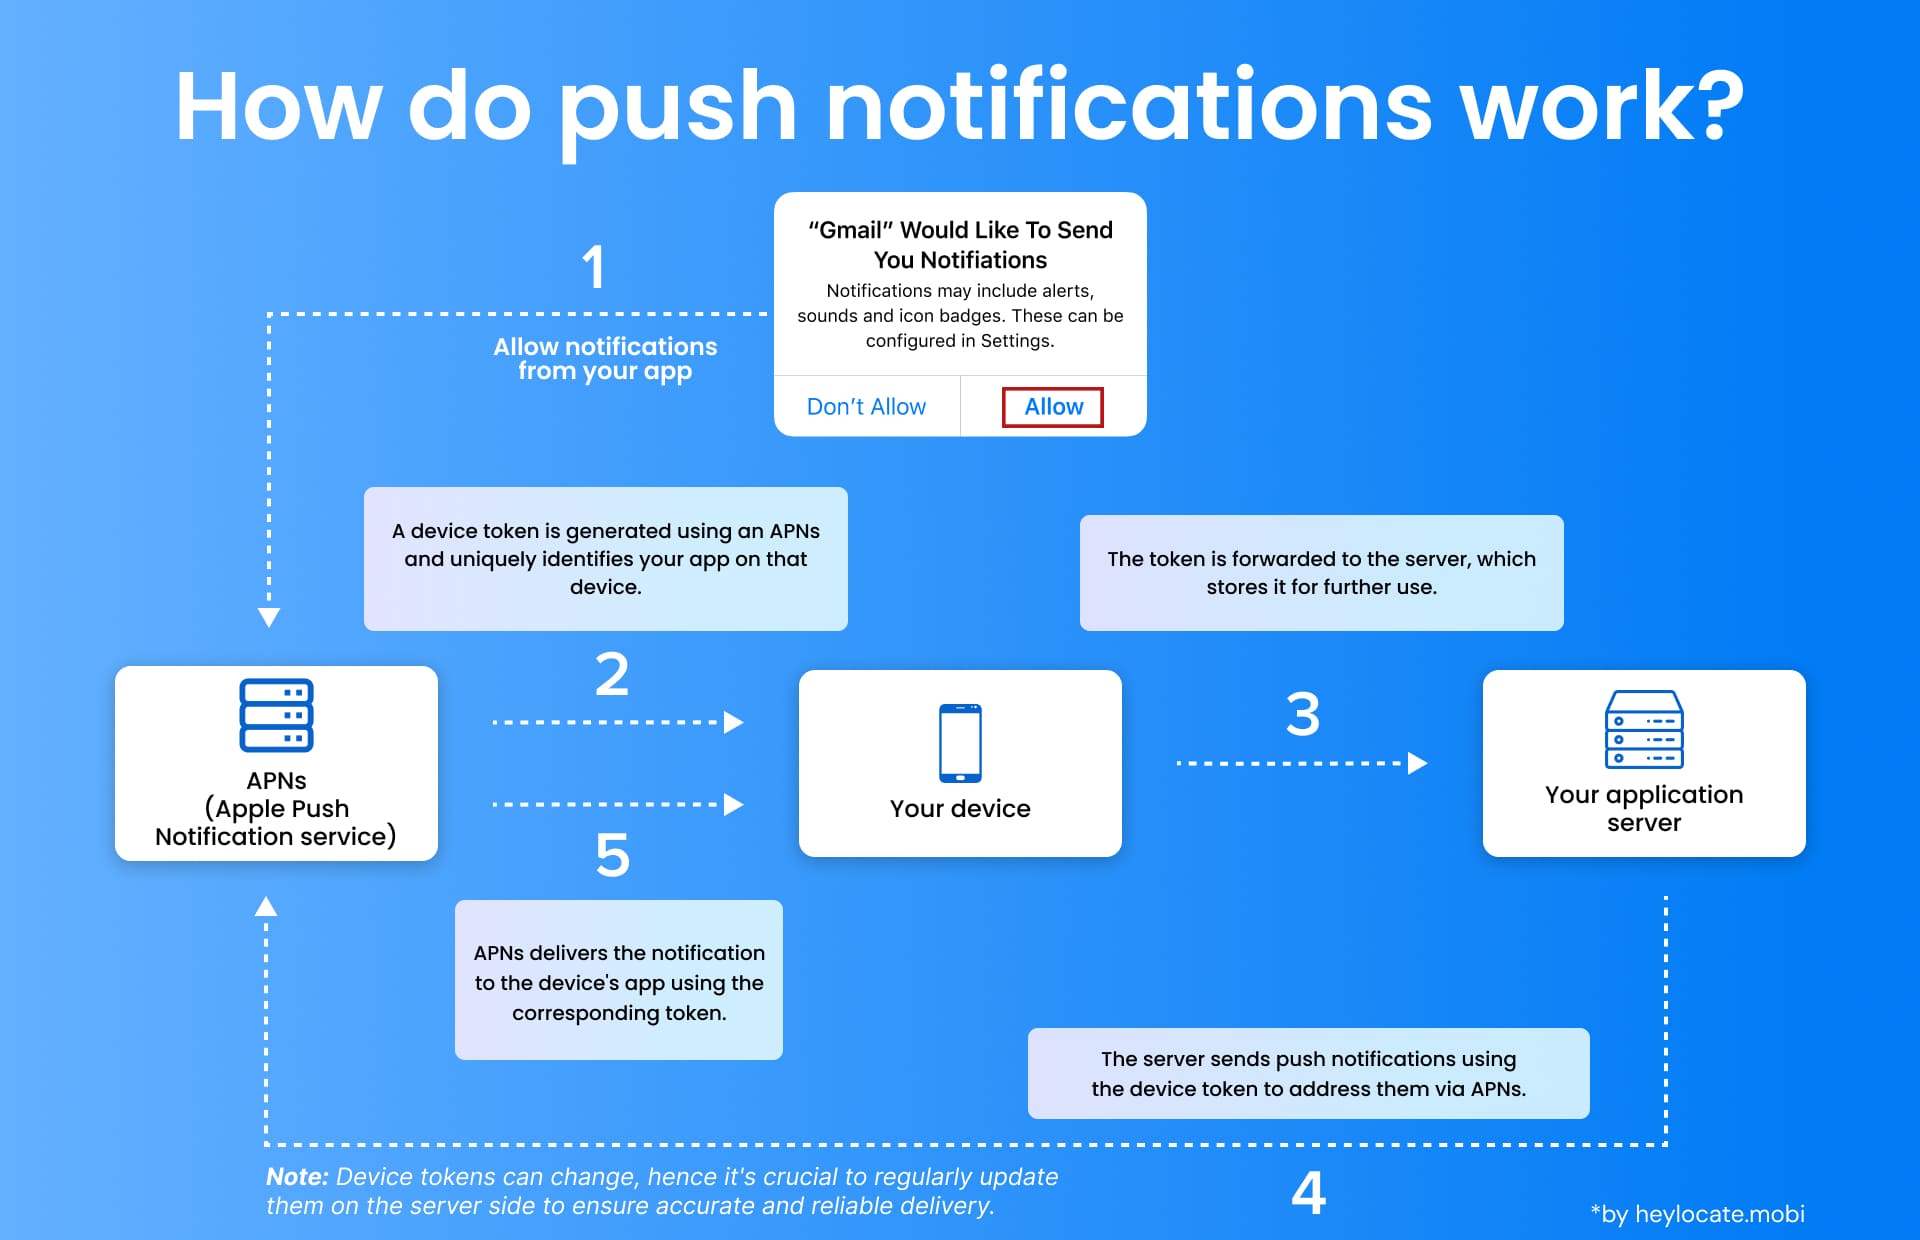 An explanatory graphic of how push notifications work, from when a user allows a notification from an app, through the full cycle of the app server, and the APNs, and finally delivering the notification back to the user's device